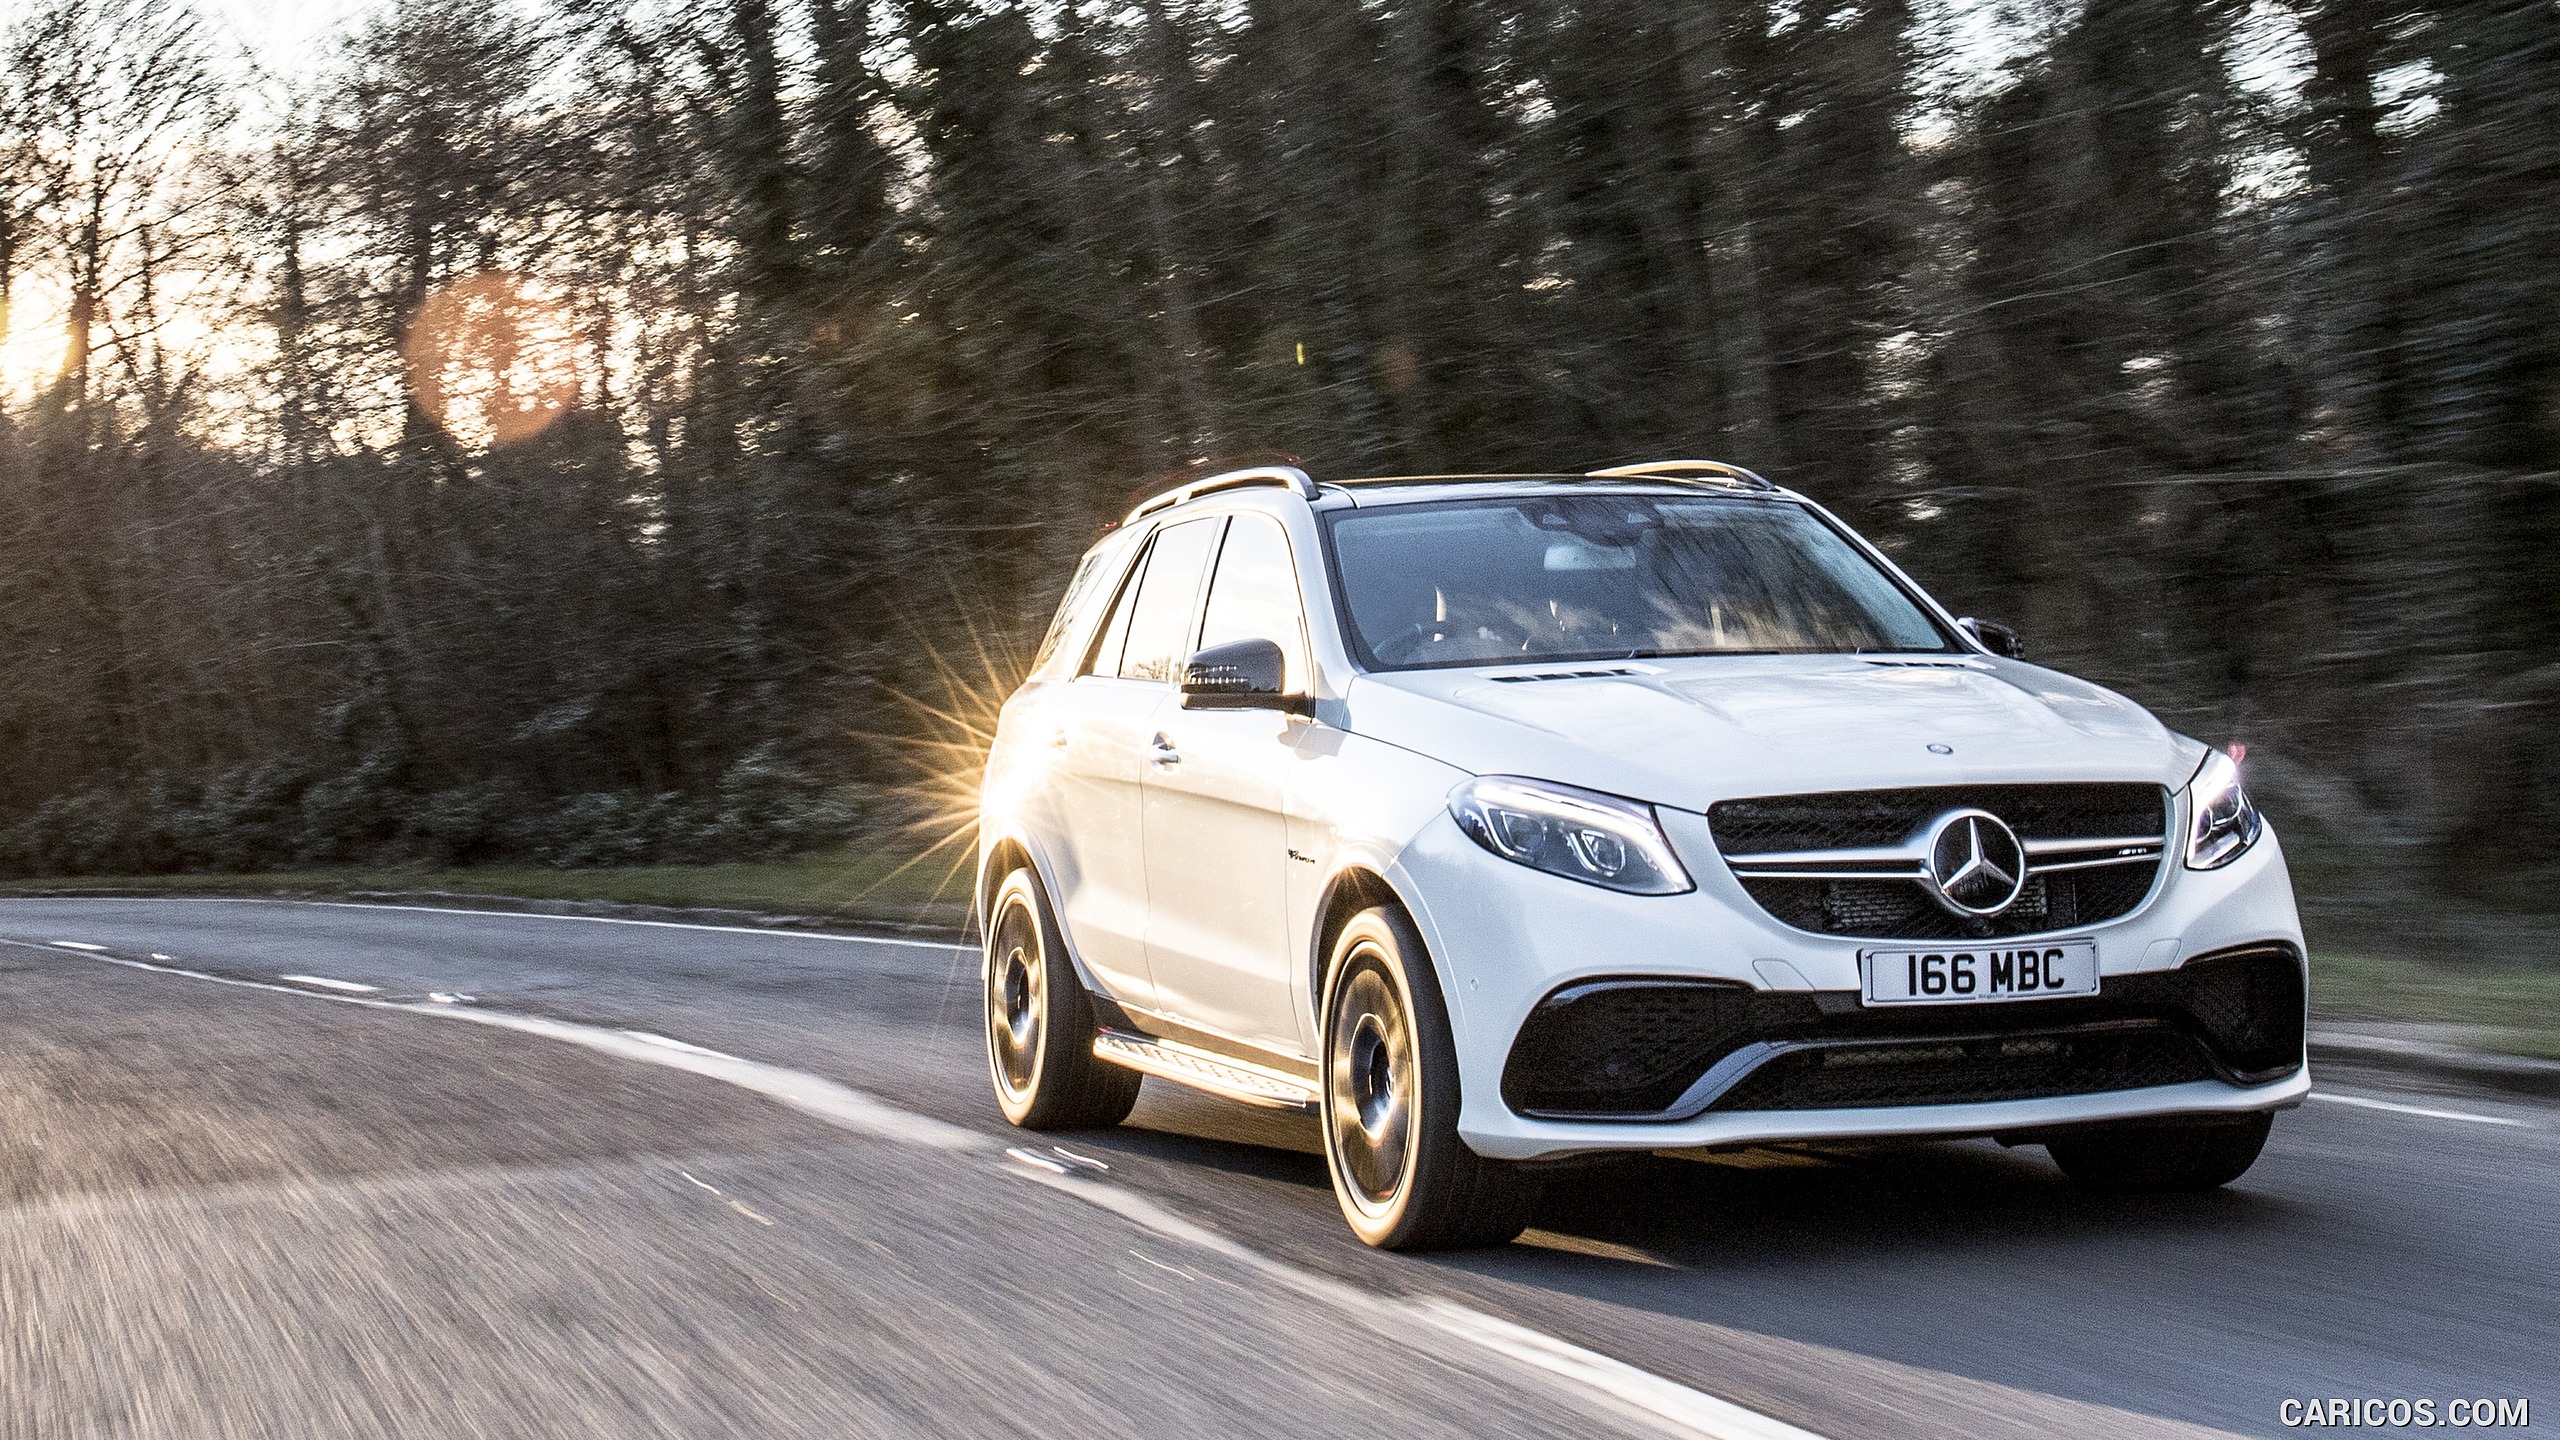 2016 Mercedes-AMG GLE 63 S (UK-Spec) - Front, #43 of 68